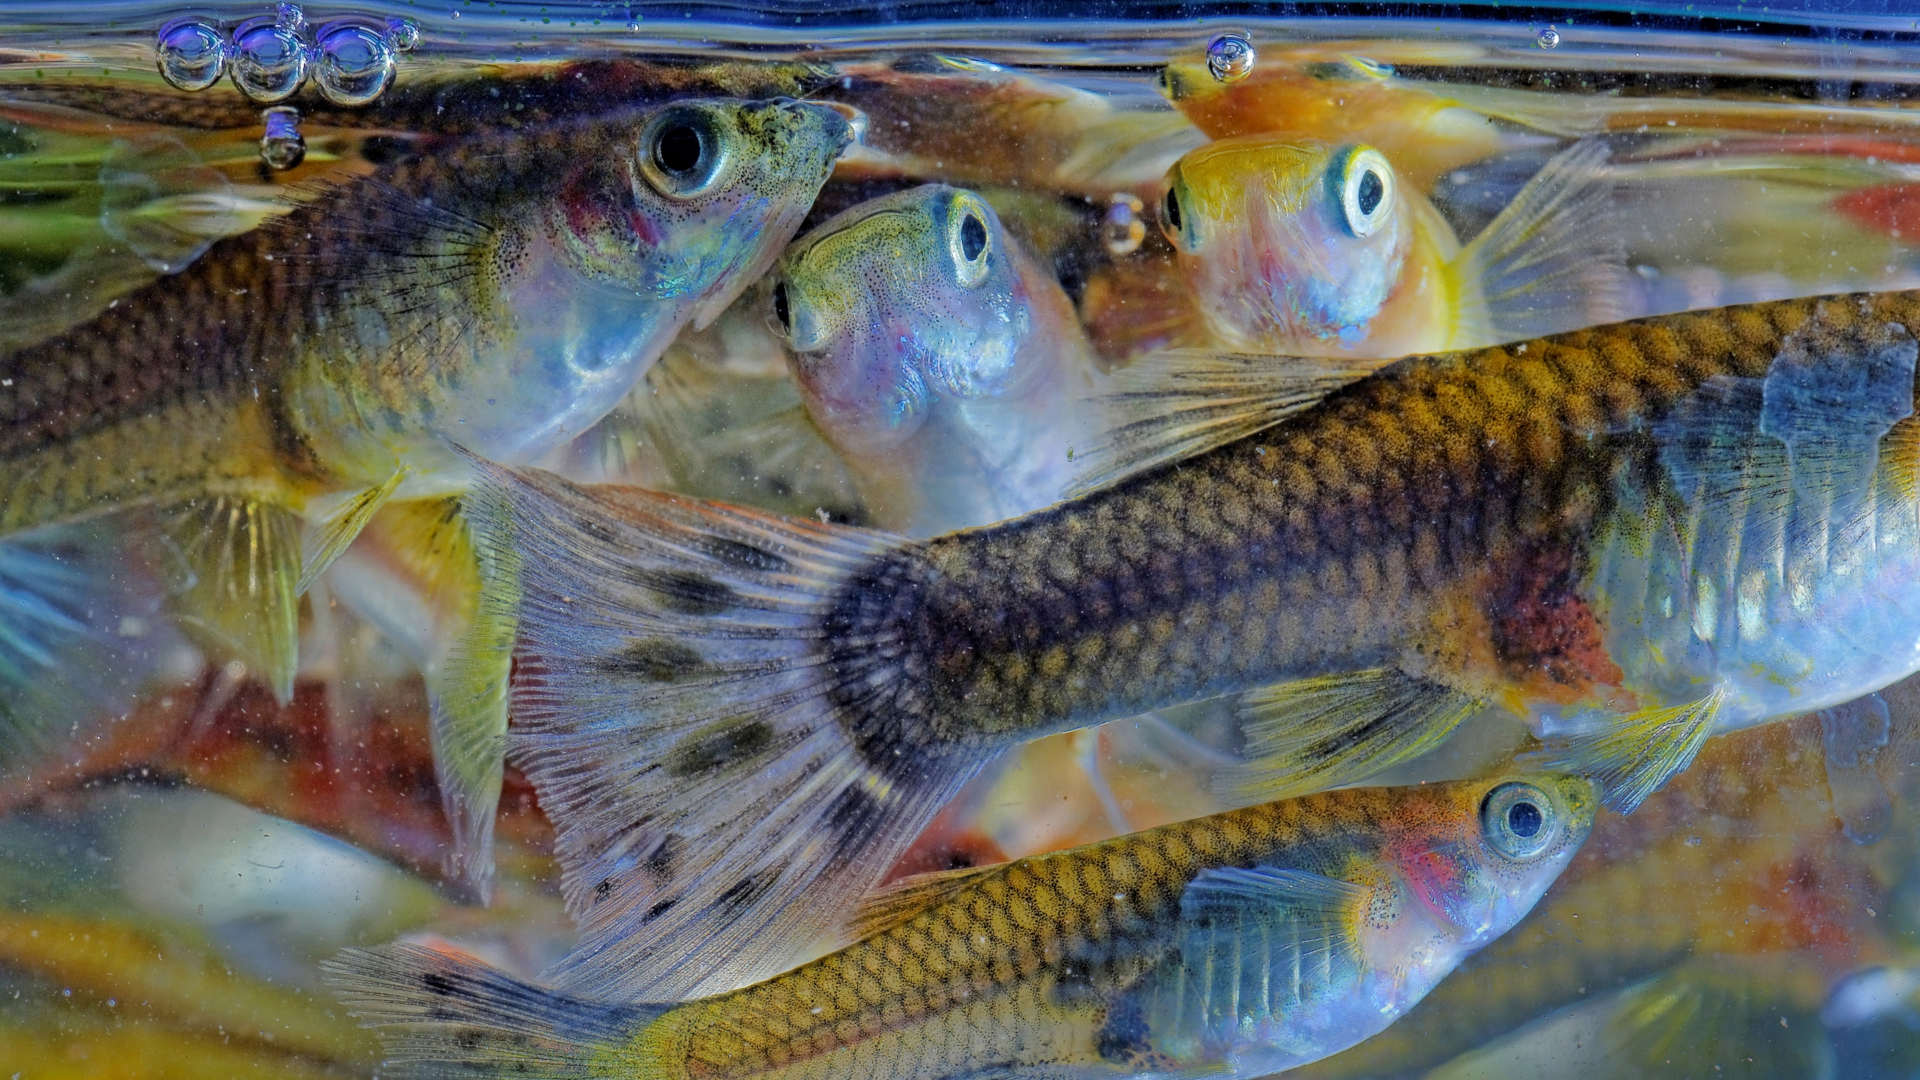 The fish in our oceans are filled with drugs, new study says